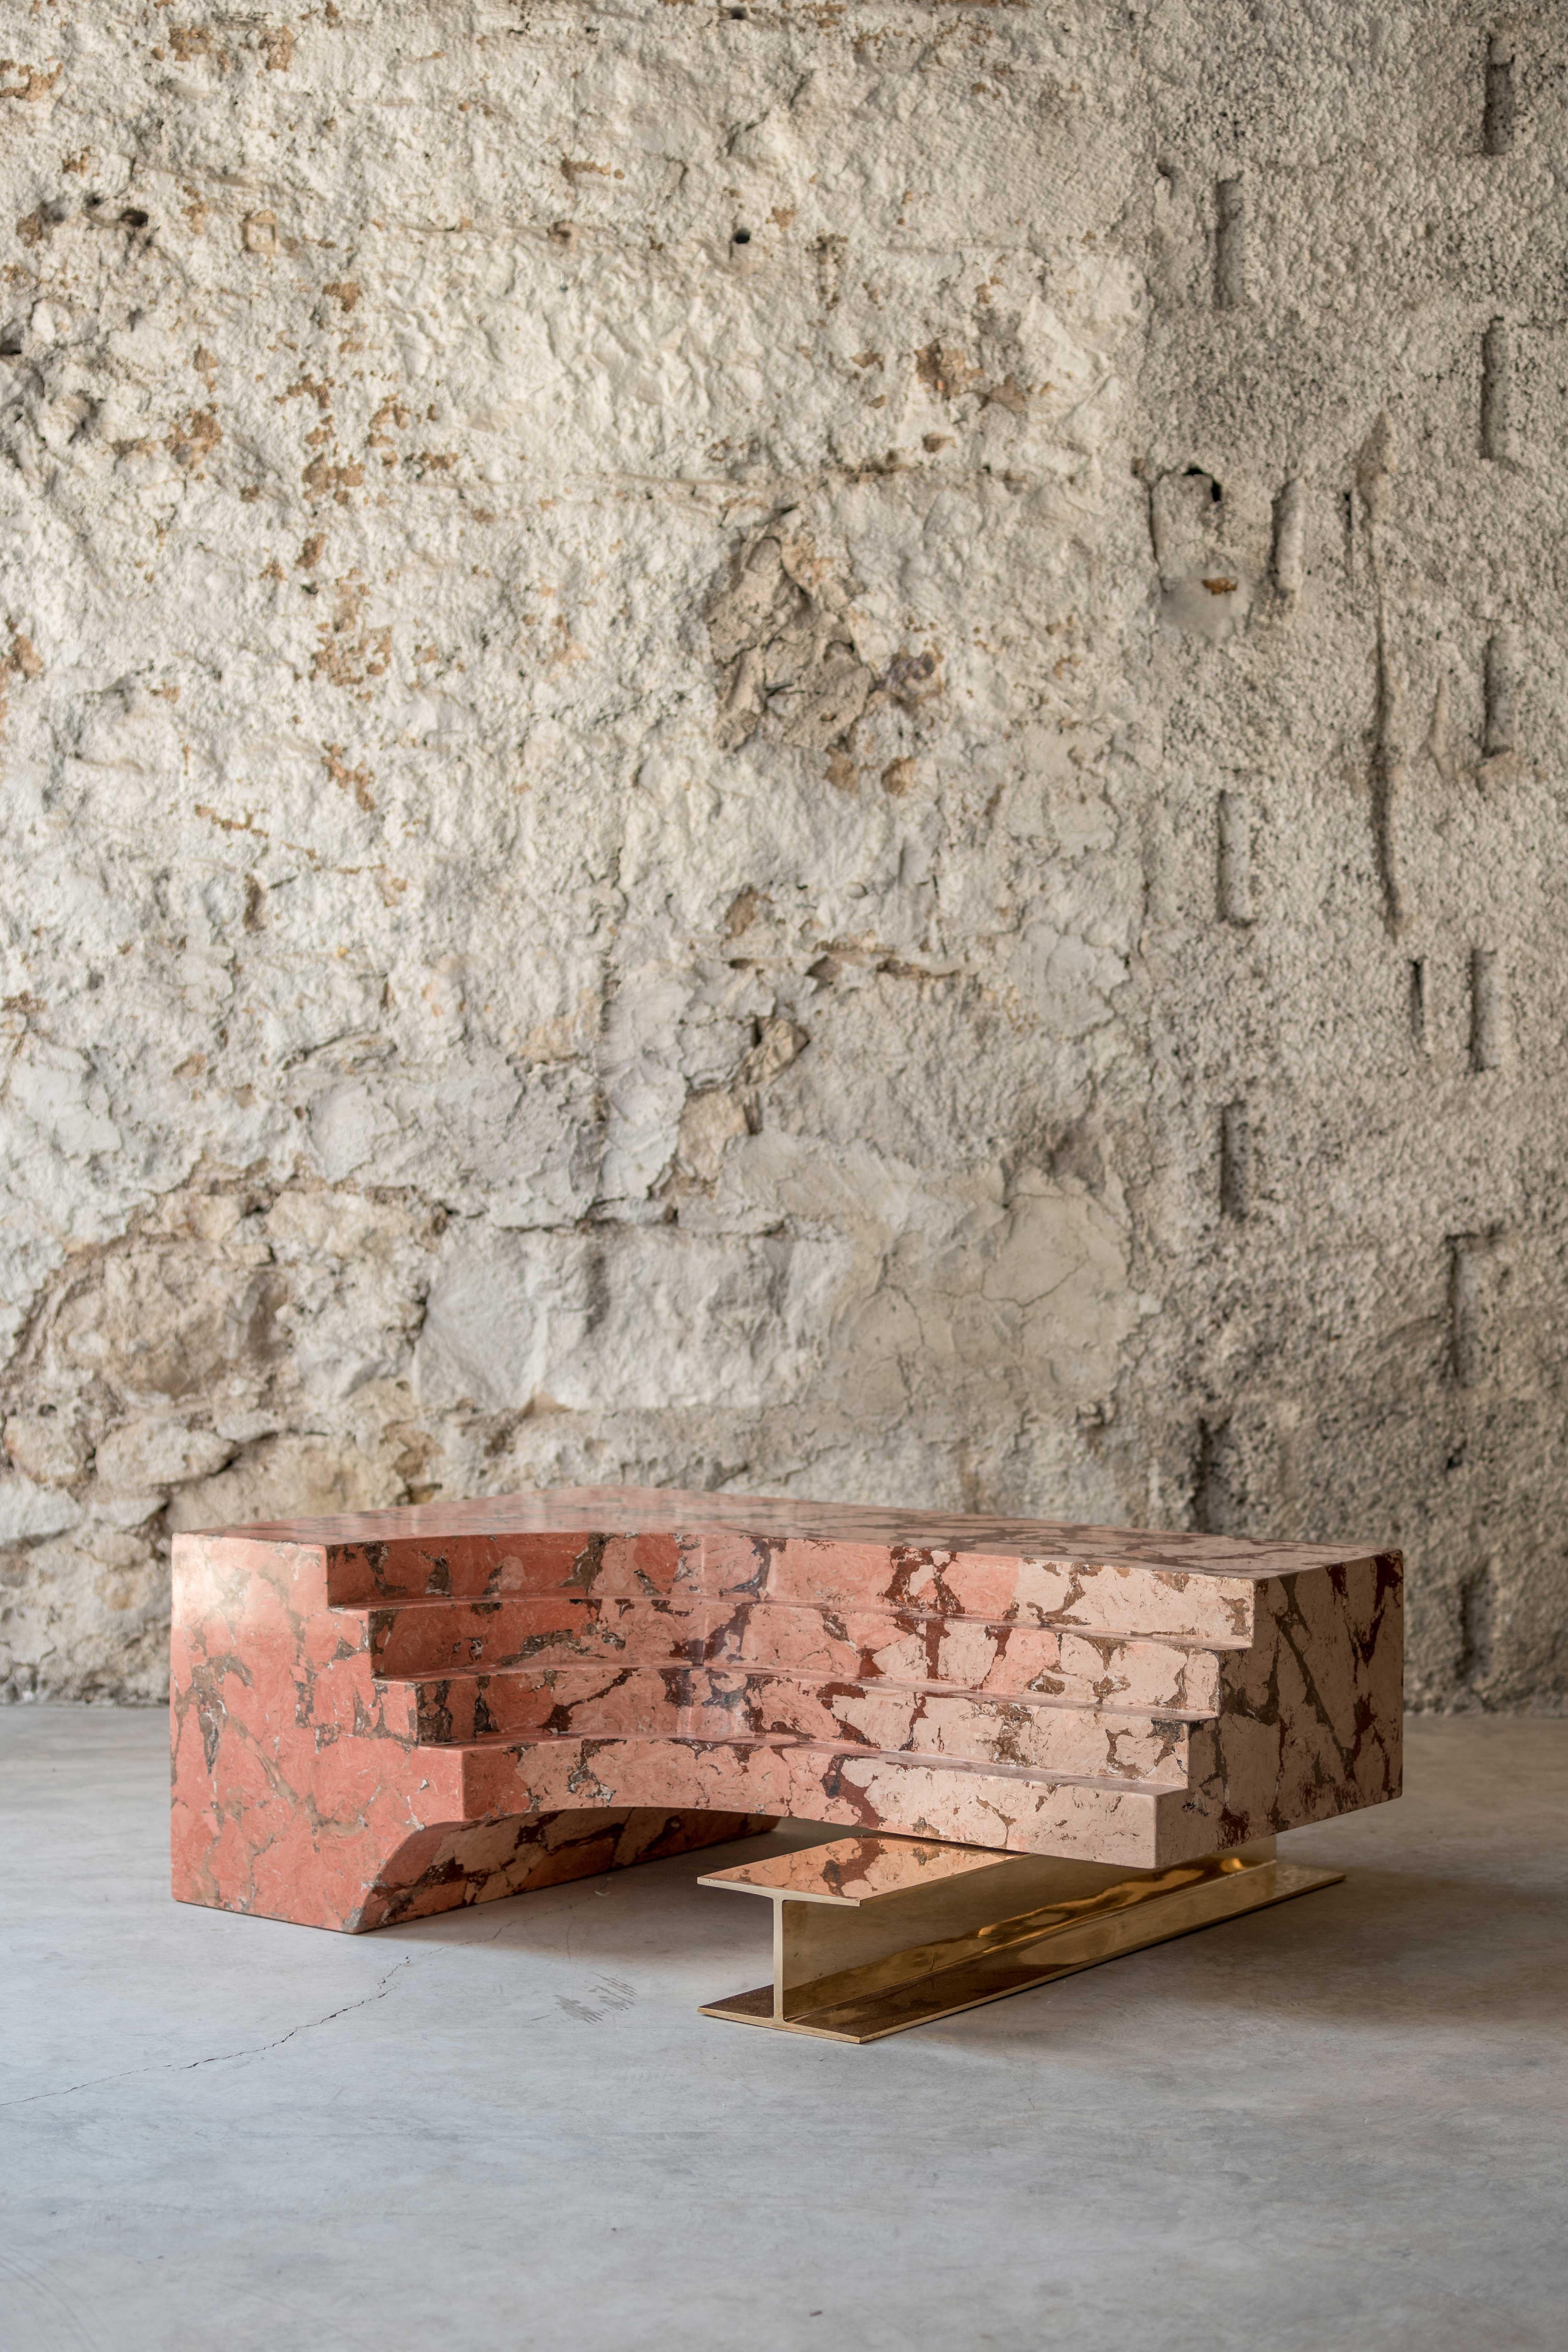 Ruins by Roberto Sironi is a series of works that re-signify architectural fragments belonging to different historical periods and great archaeological sites, modelling the forms according to new aesthetic representations. The project relates